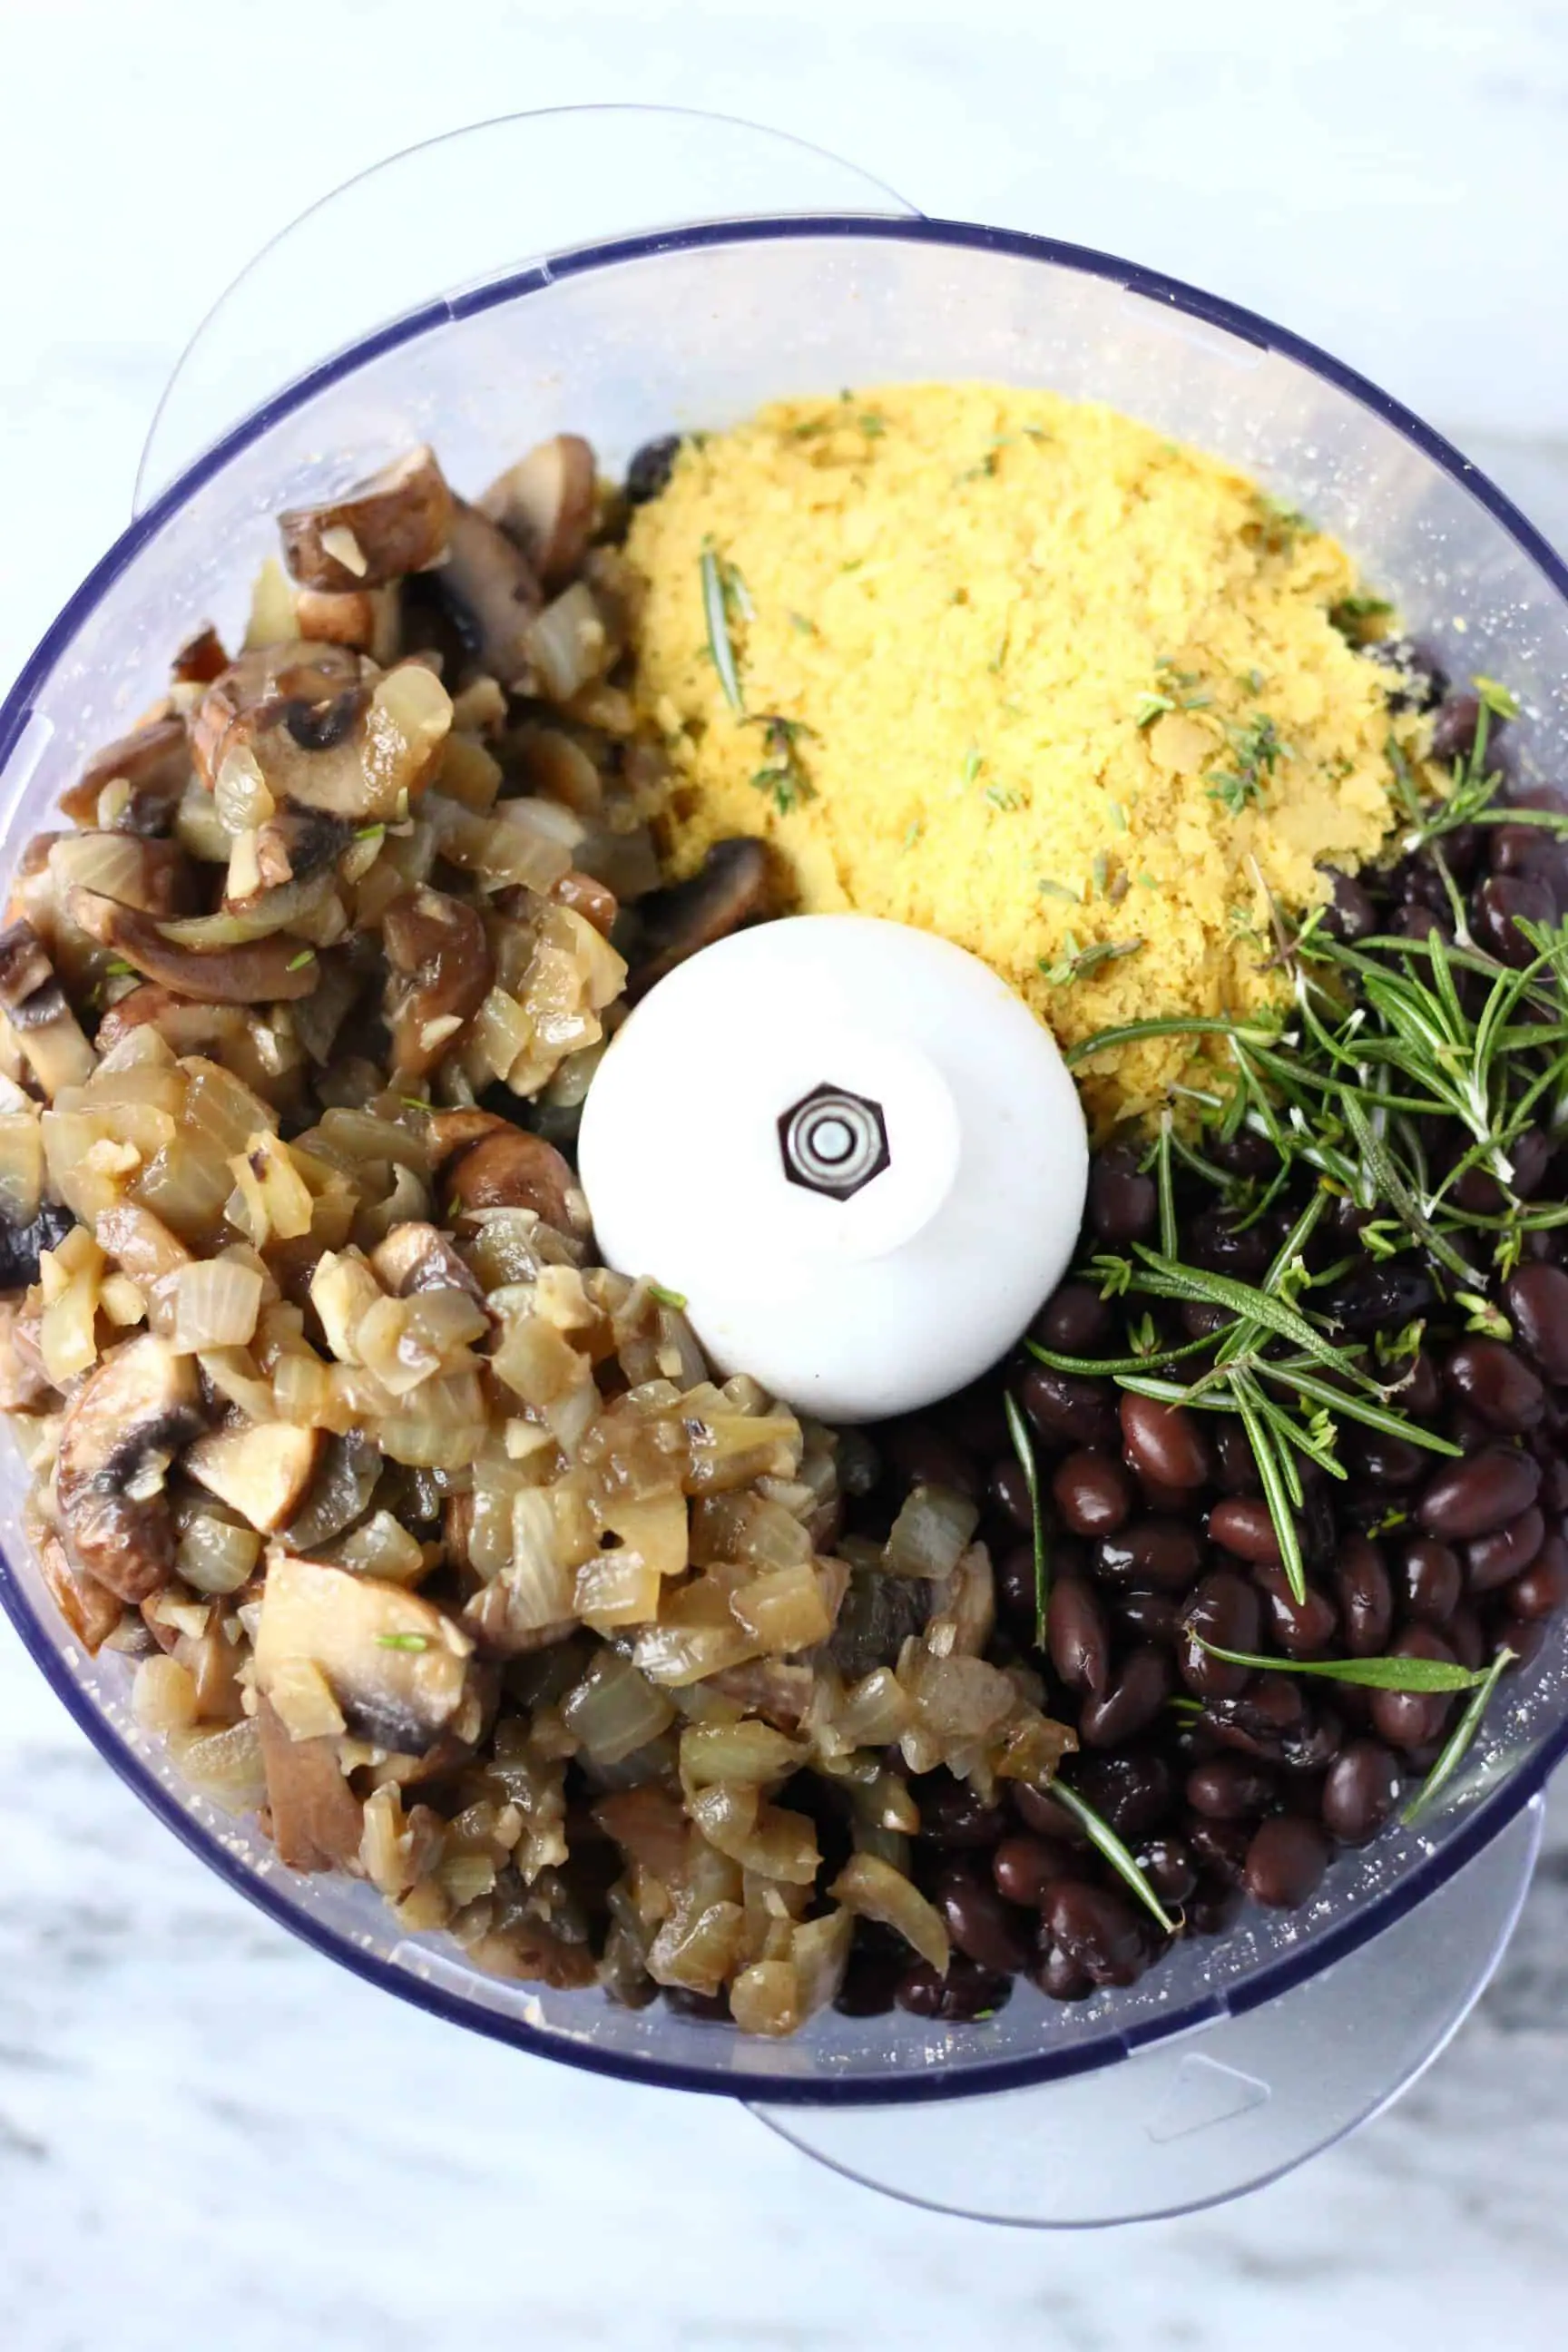 Fried onion and mushrooms, nutritional yeast, rosemary, black beans and nutritional yeast in a food processor 